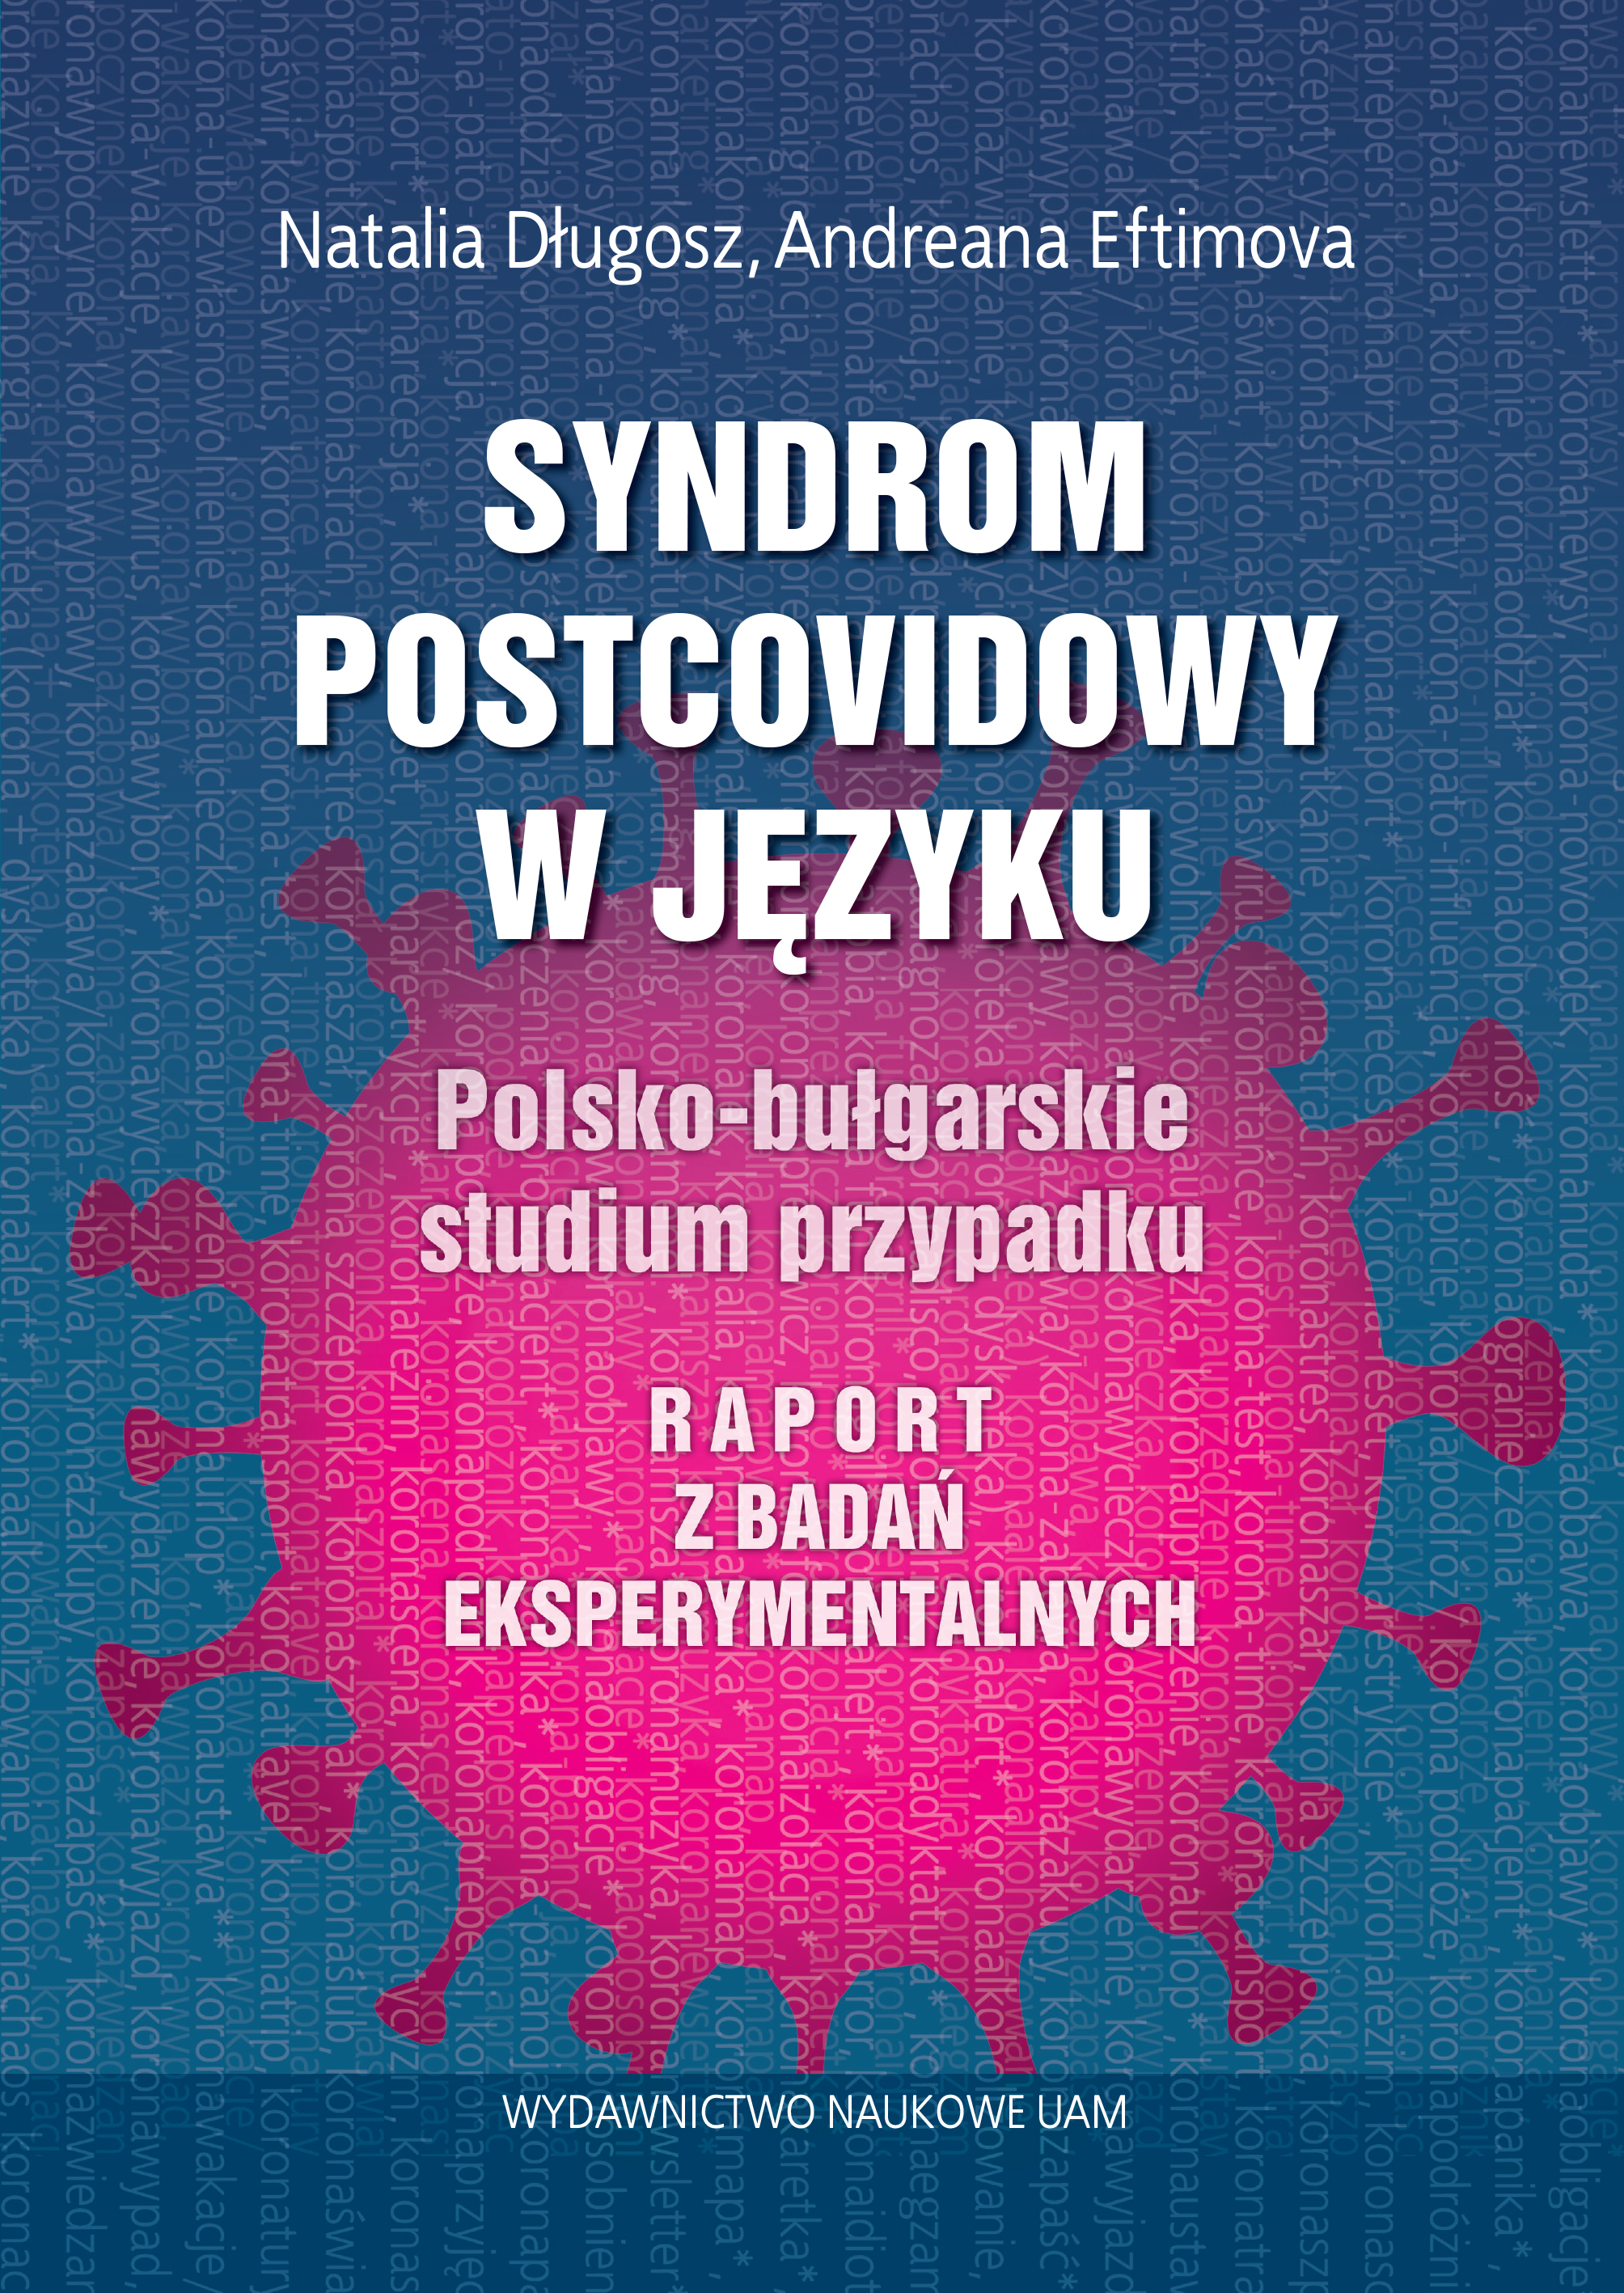 Post-Covid syndrome in language